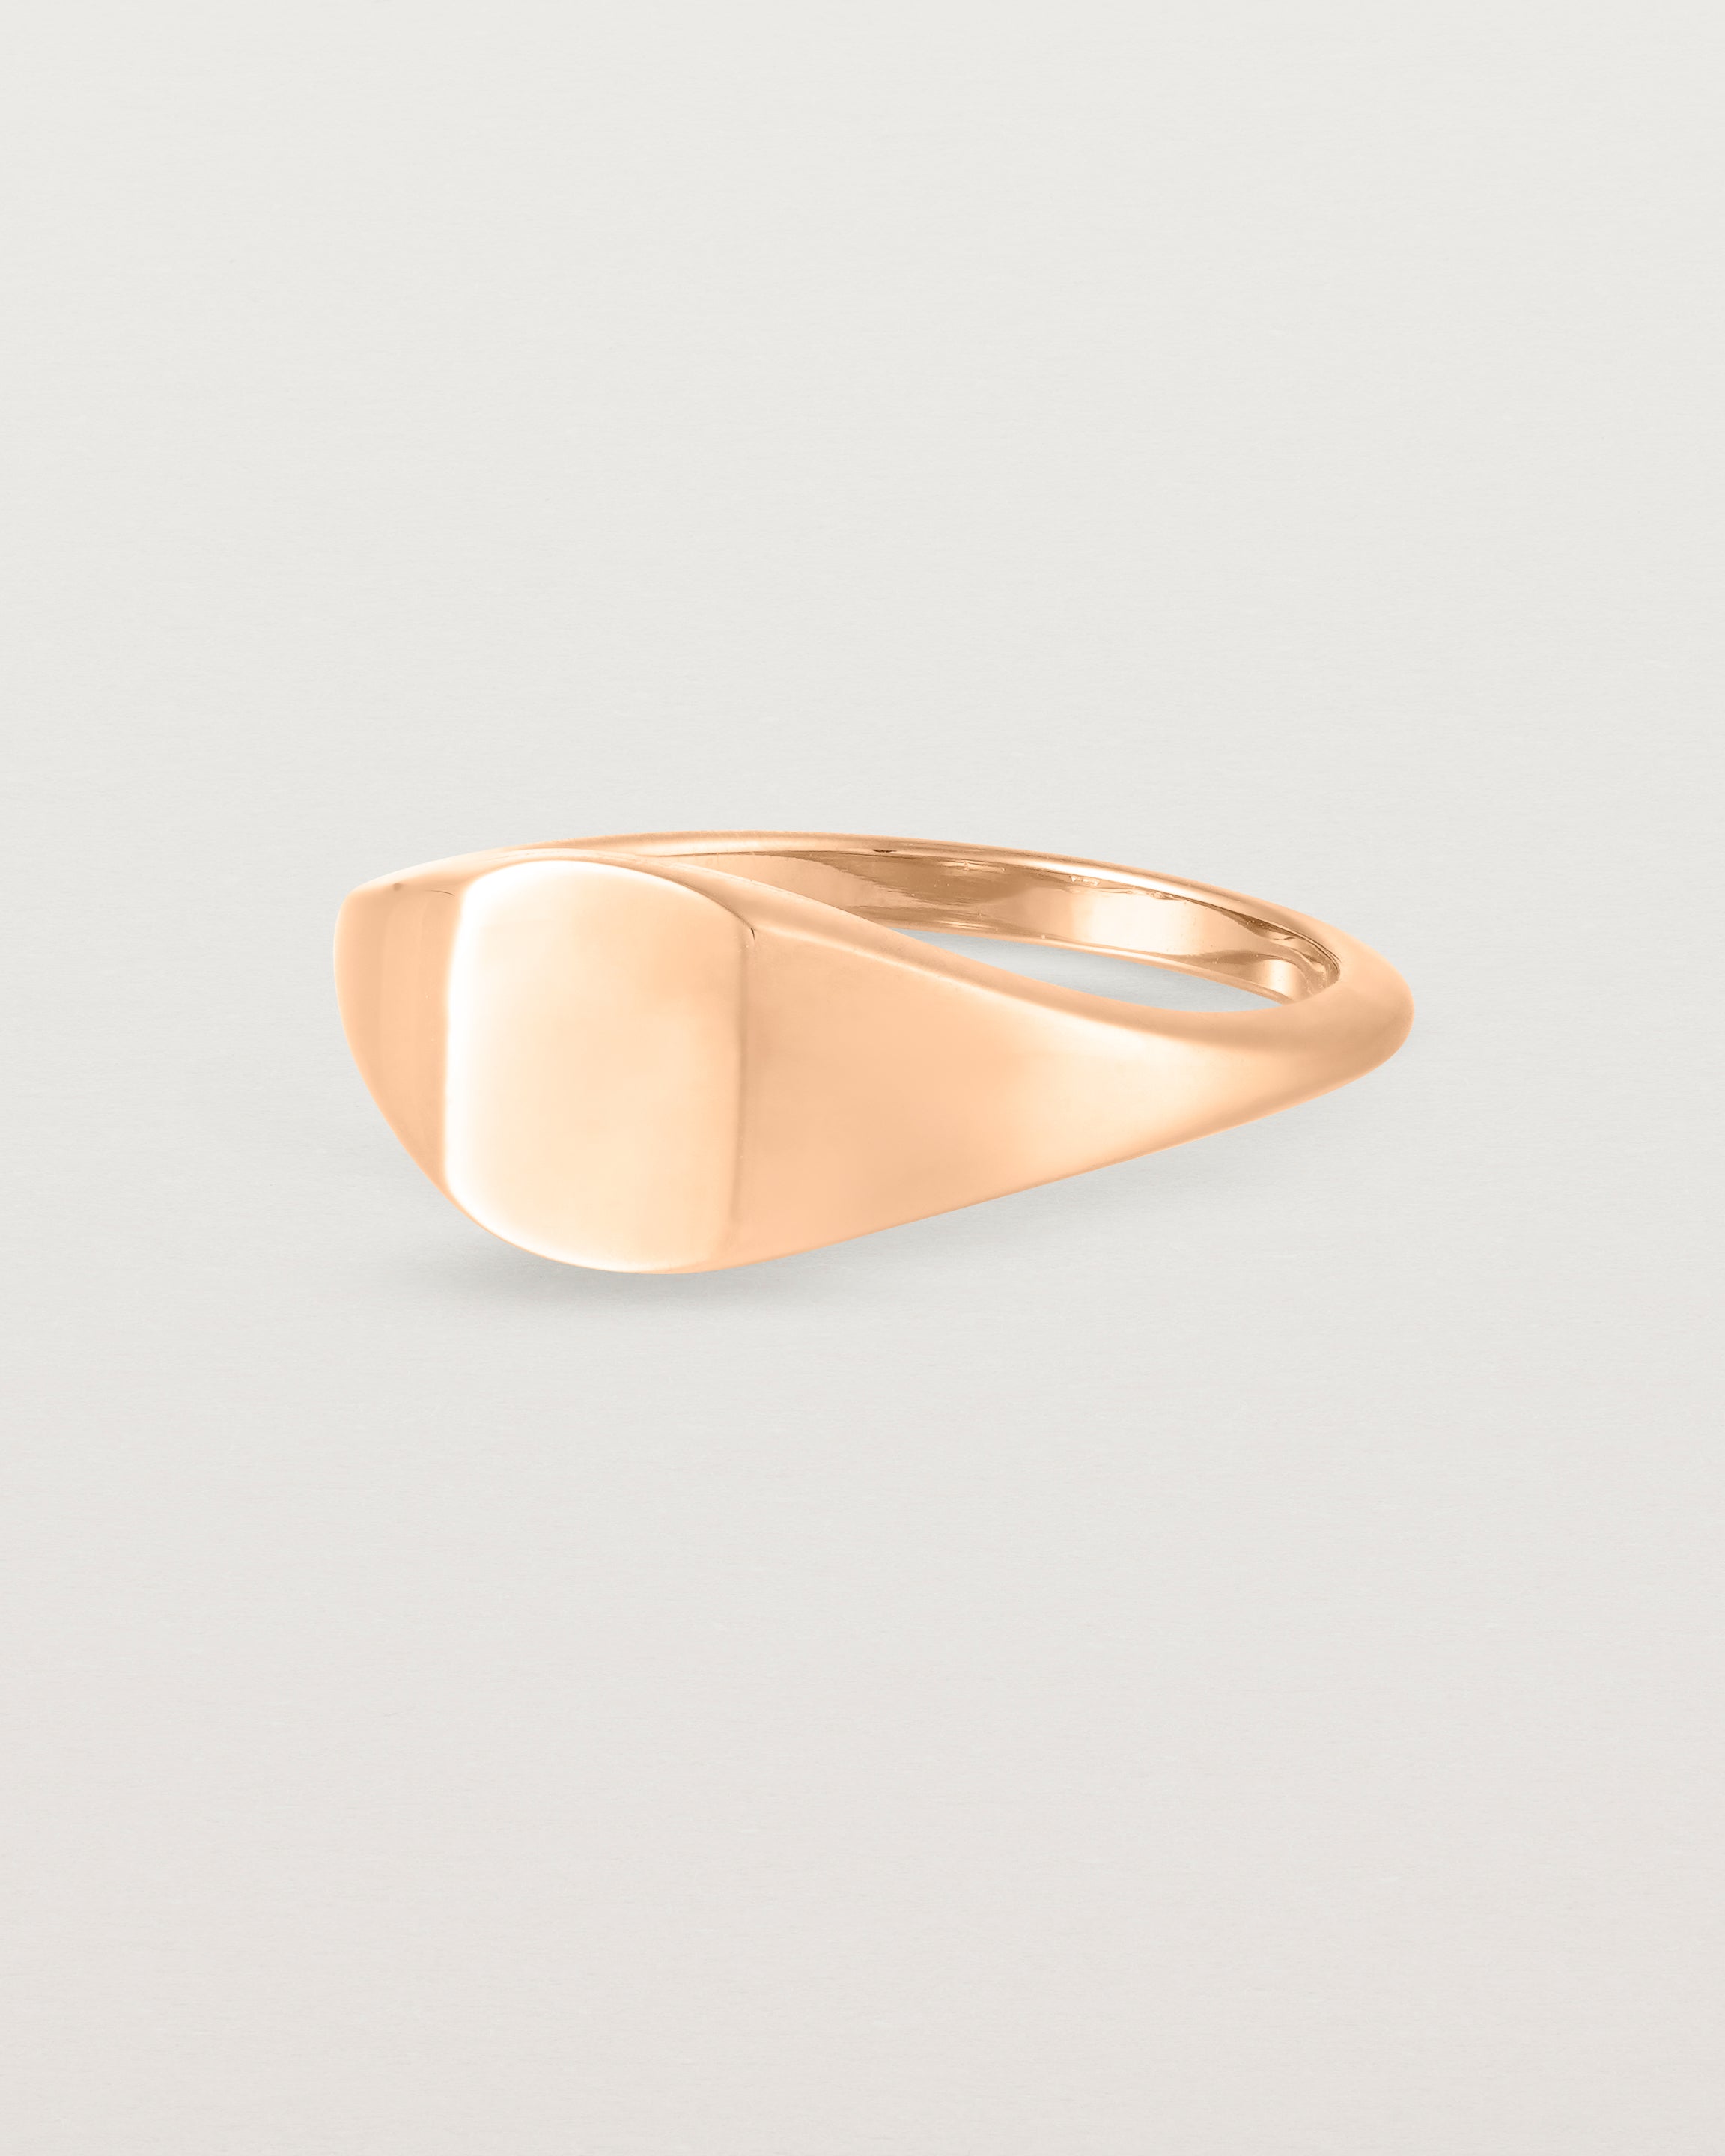 Angled view of a simple signet with an elongated rectangular face in rose gold